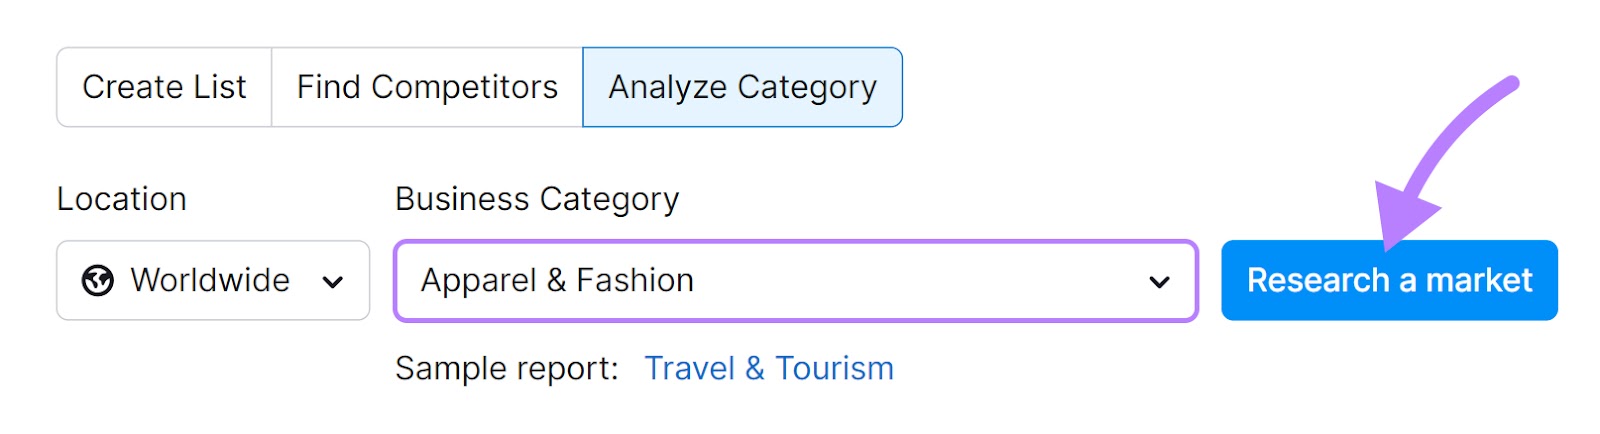 "Apparel & Fashion" category selected, with "Research a market" button highlighted